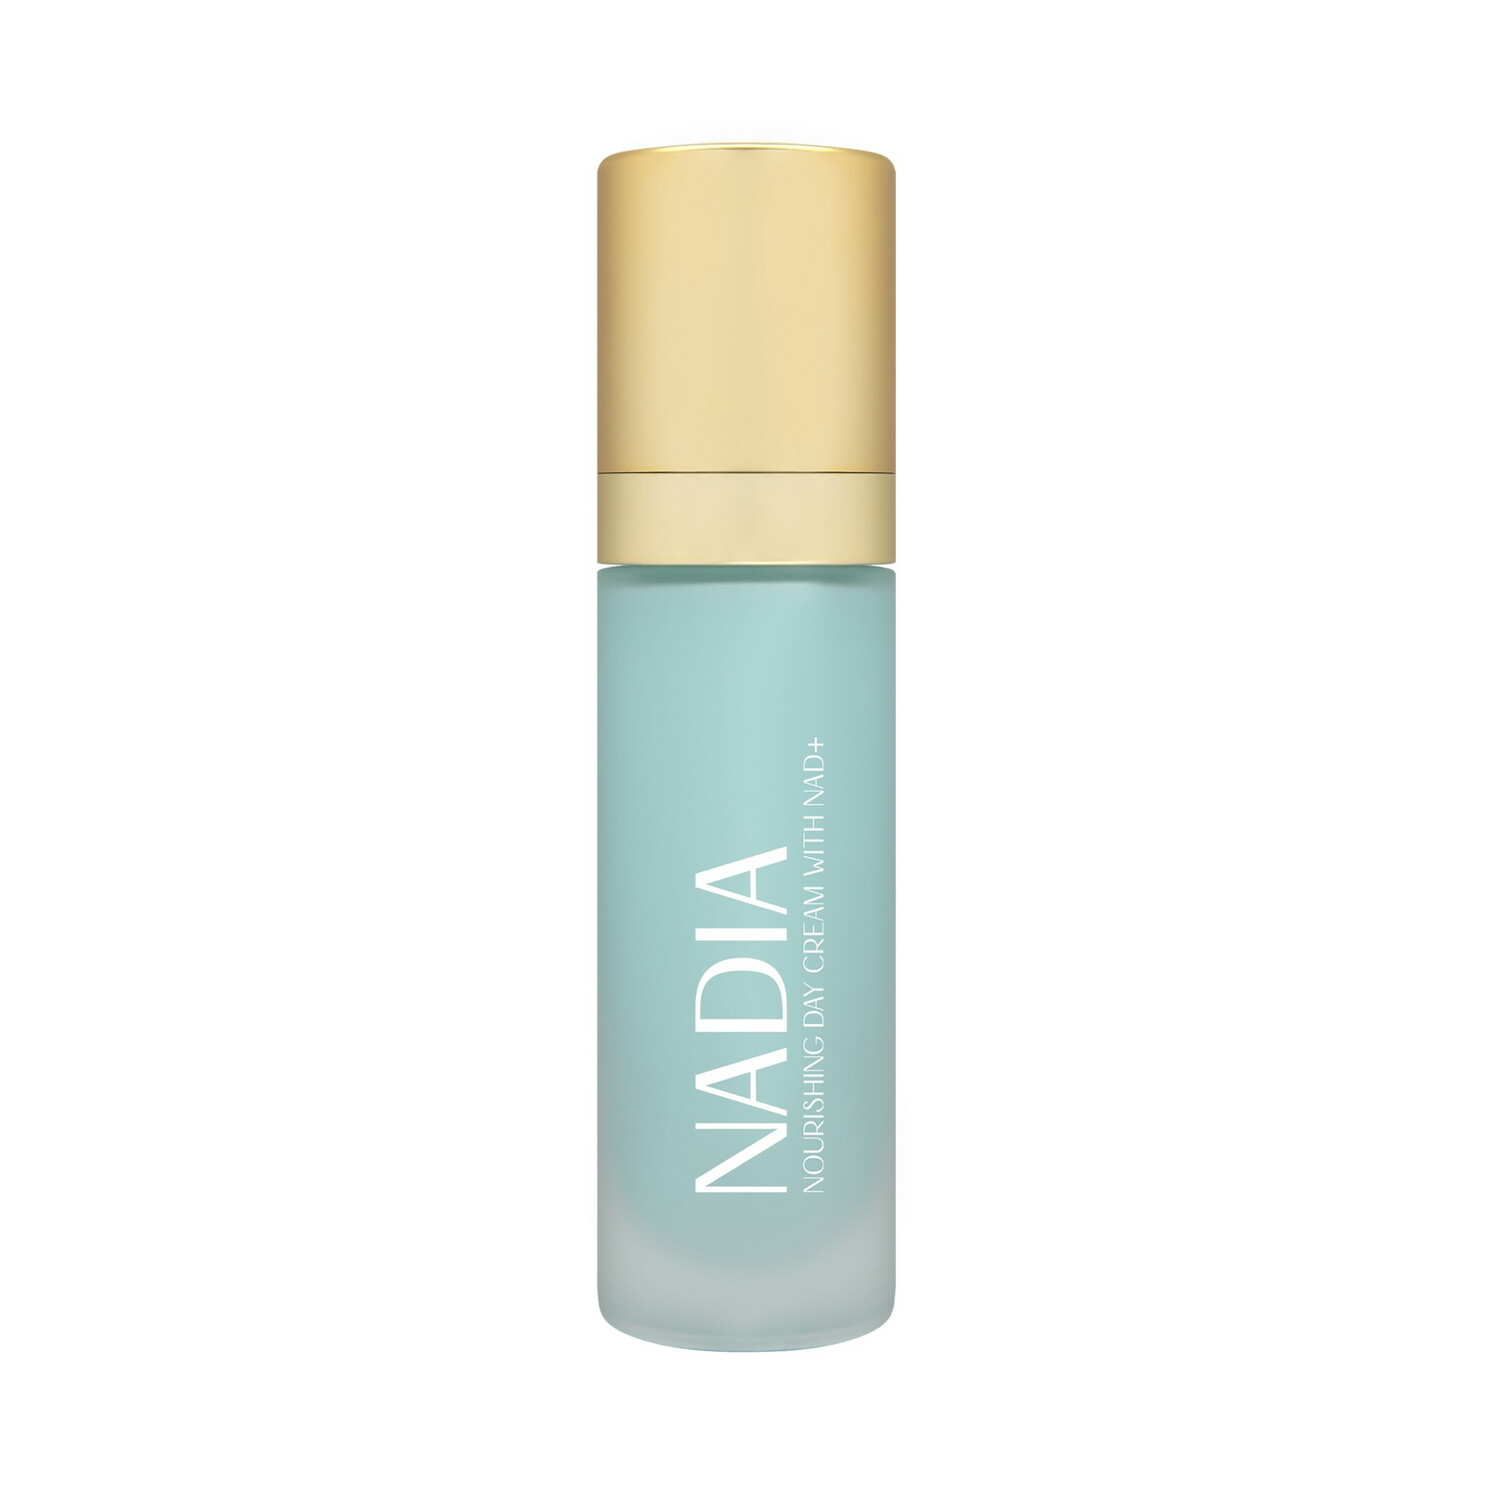 NOURISHING DAY WITH NAD+